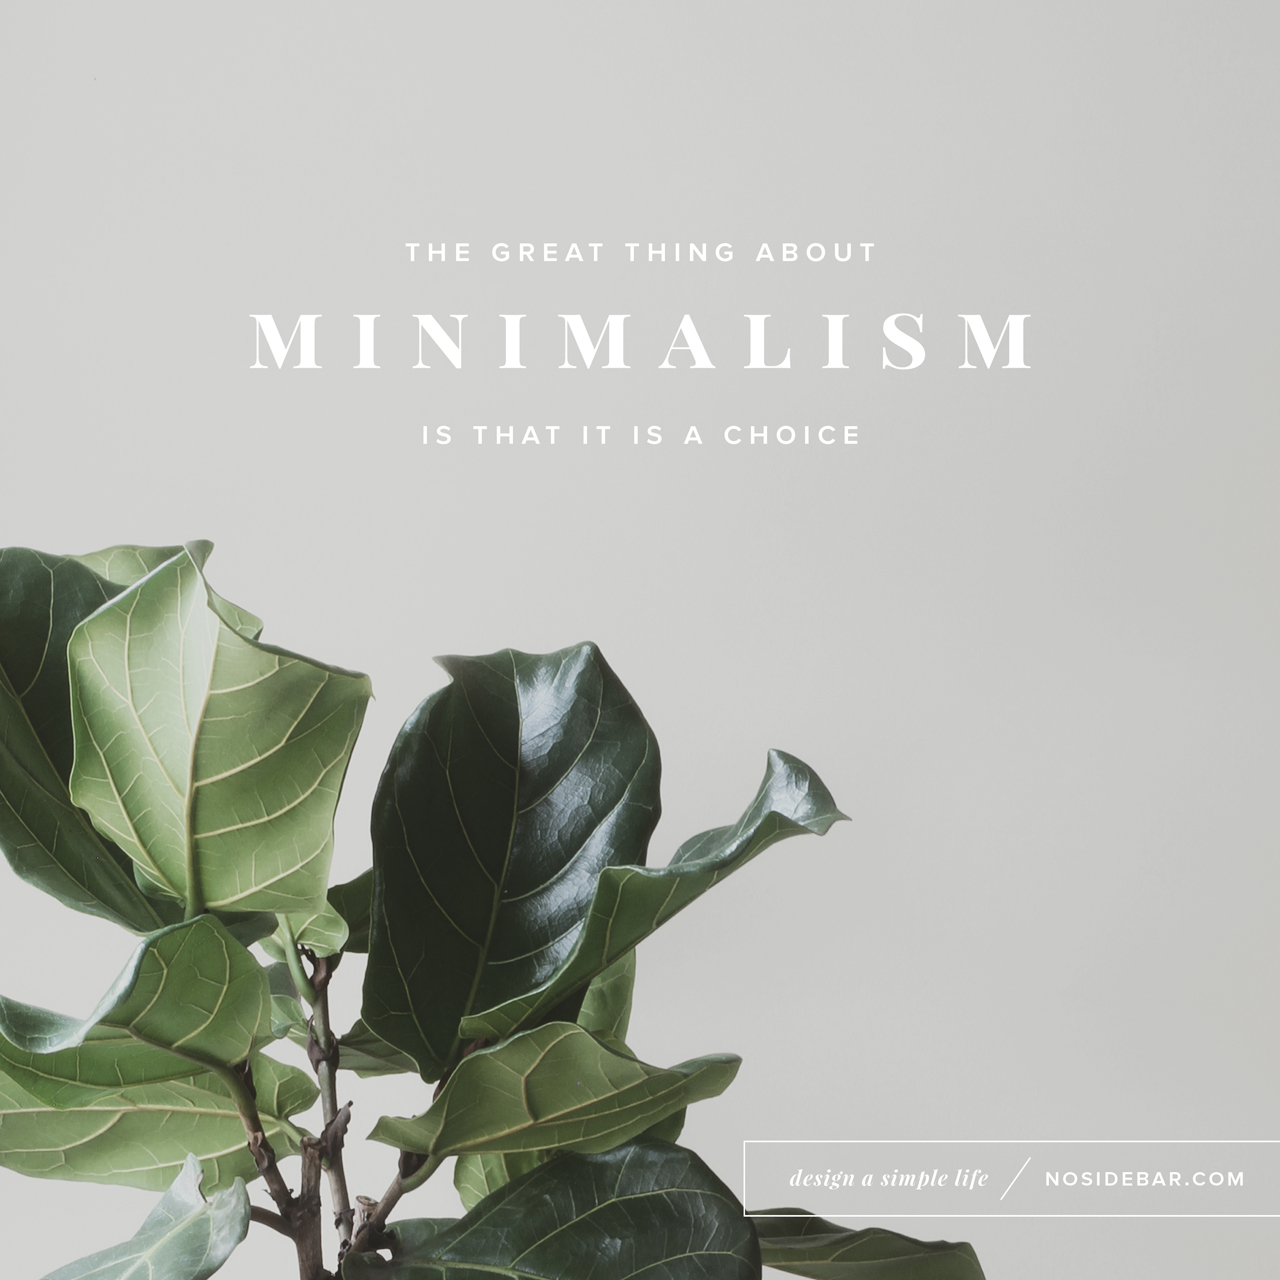 5 Minimalism Quotes to Help You Design a Simple Life